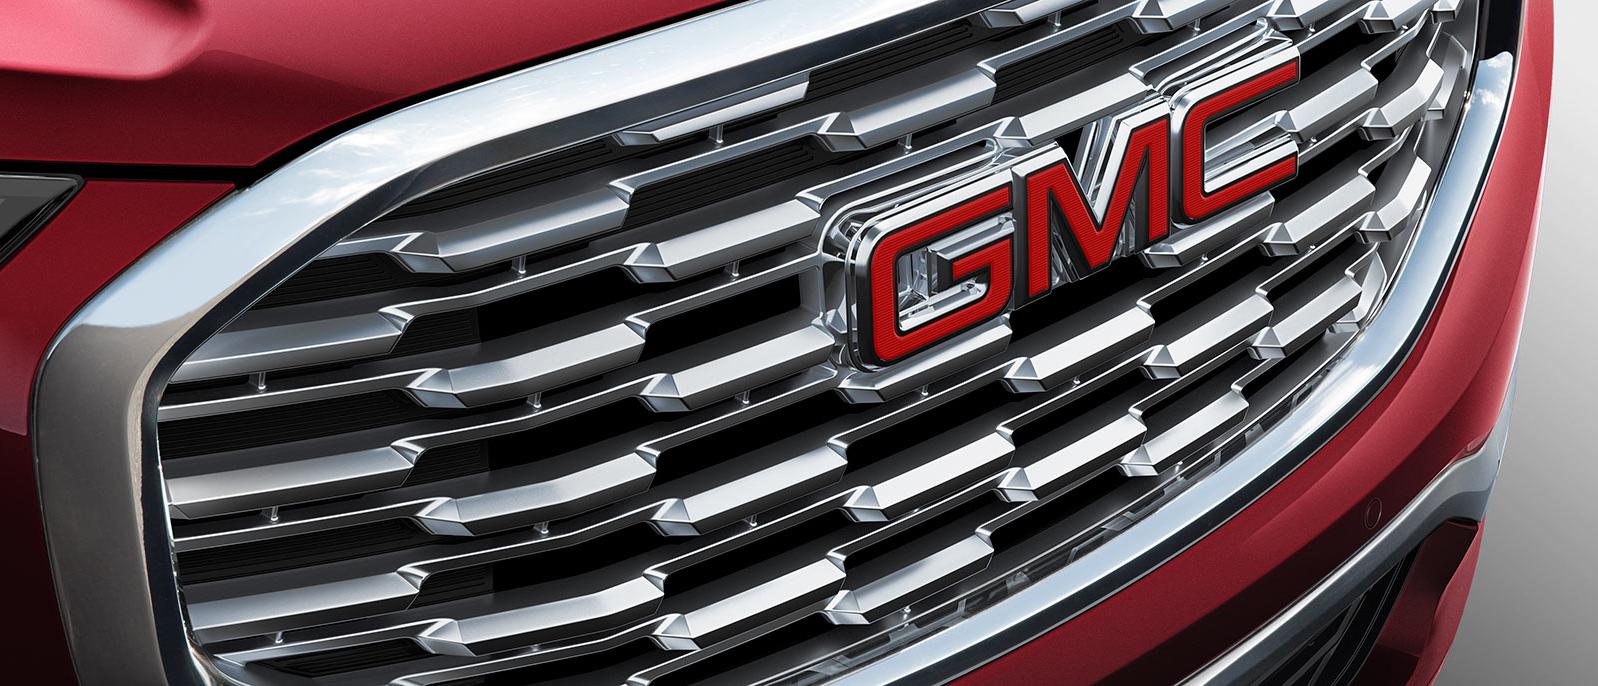 Close up of a GMC Denali Grille featuring the logo.